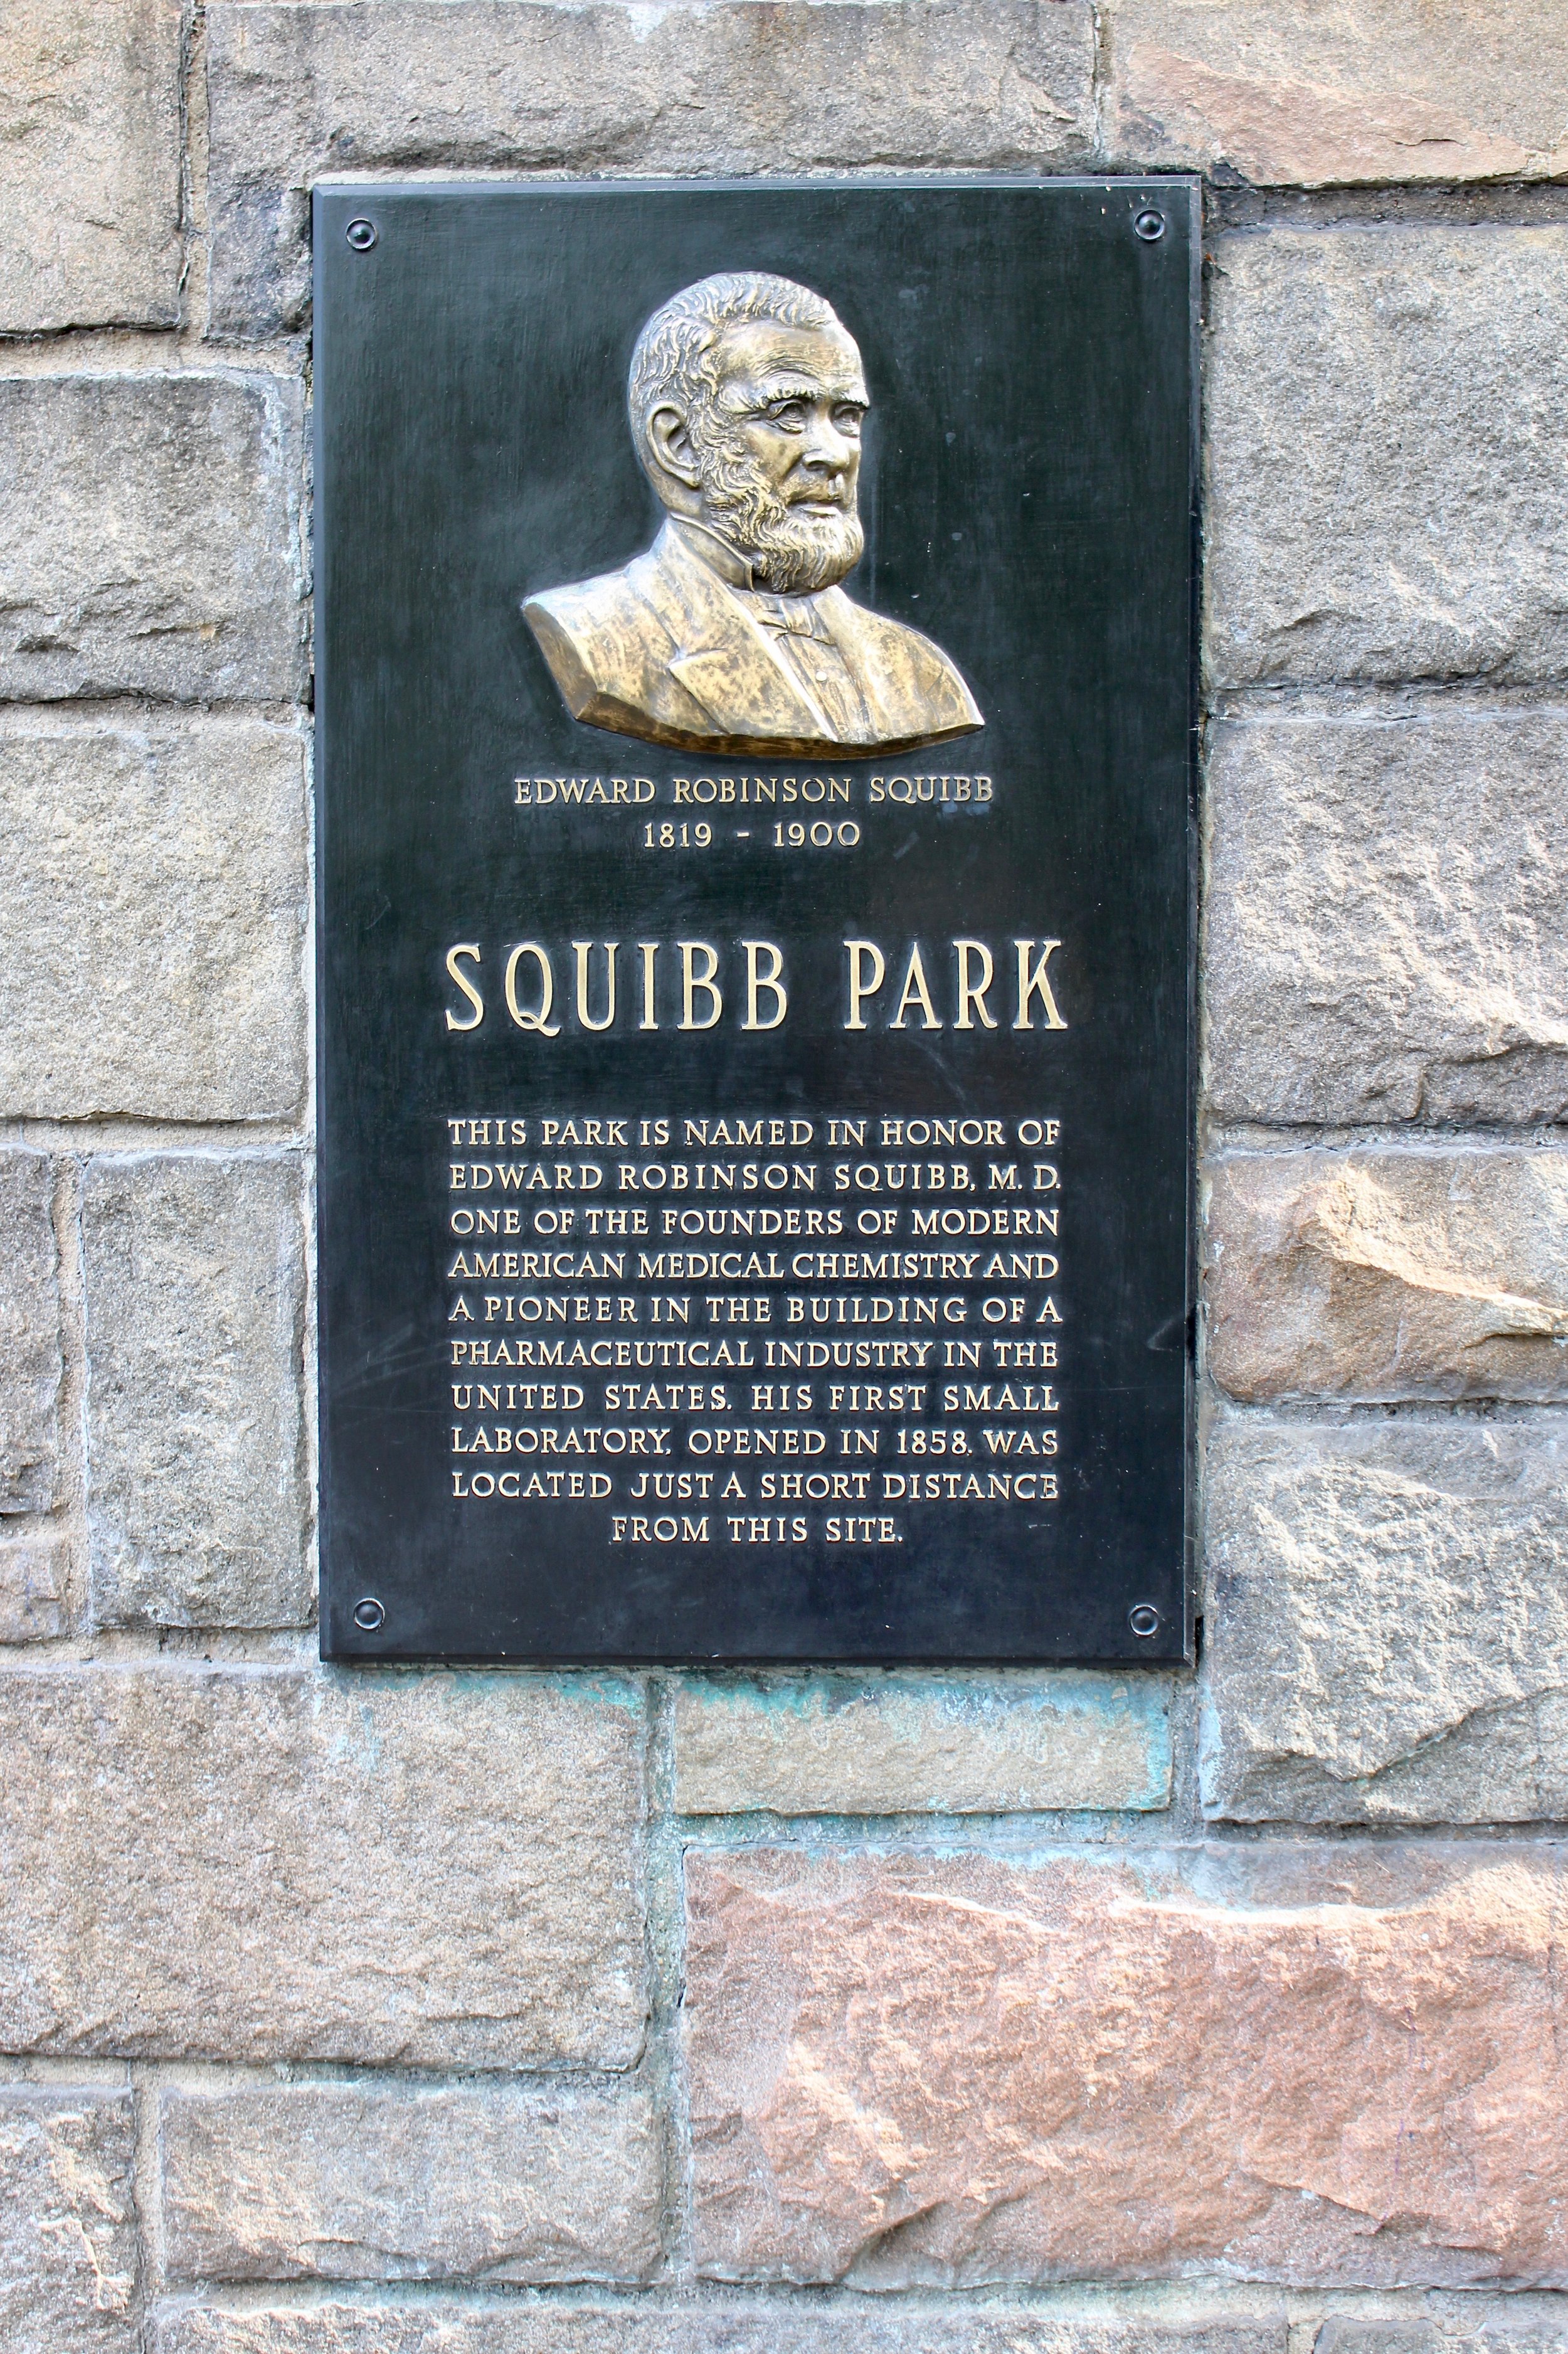  Squibb Park is the first "landing" of the footbridge which zig zags its way across.&nbsp; The Edward Robinson Squibb dedication plaque tells his story.&nbsp; As a note, there are rest rooms located here as well. 